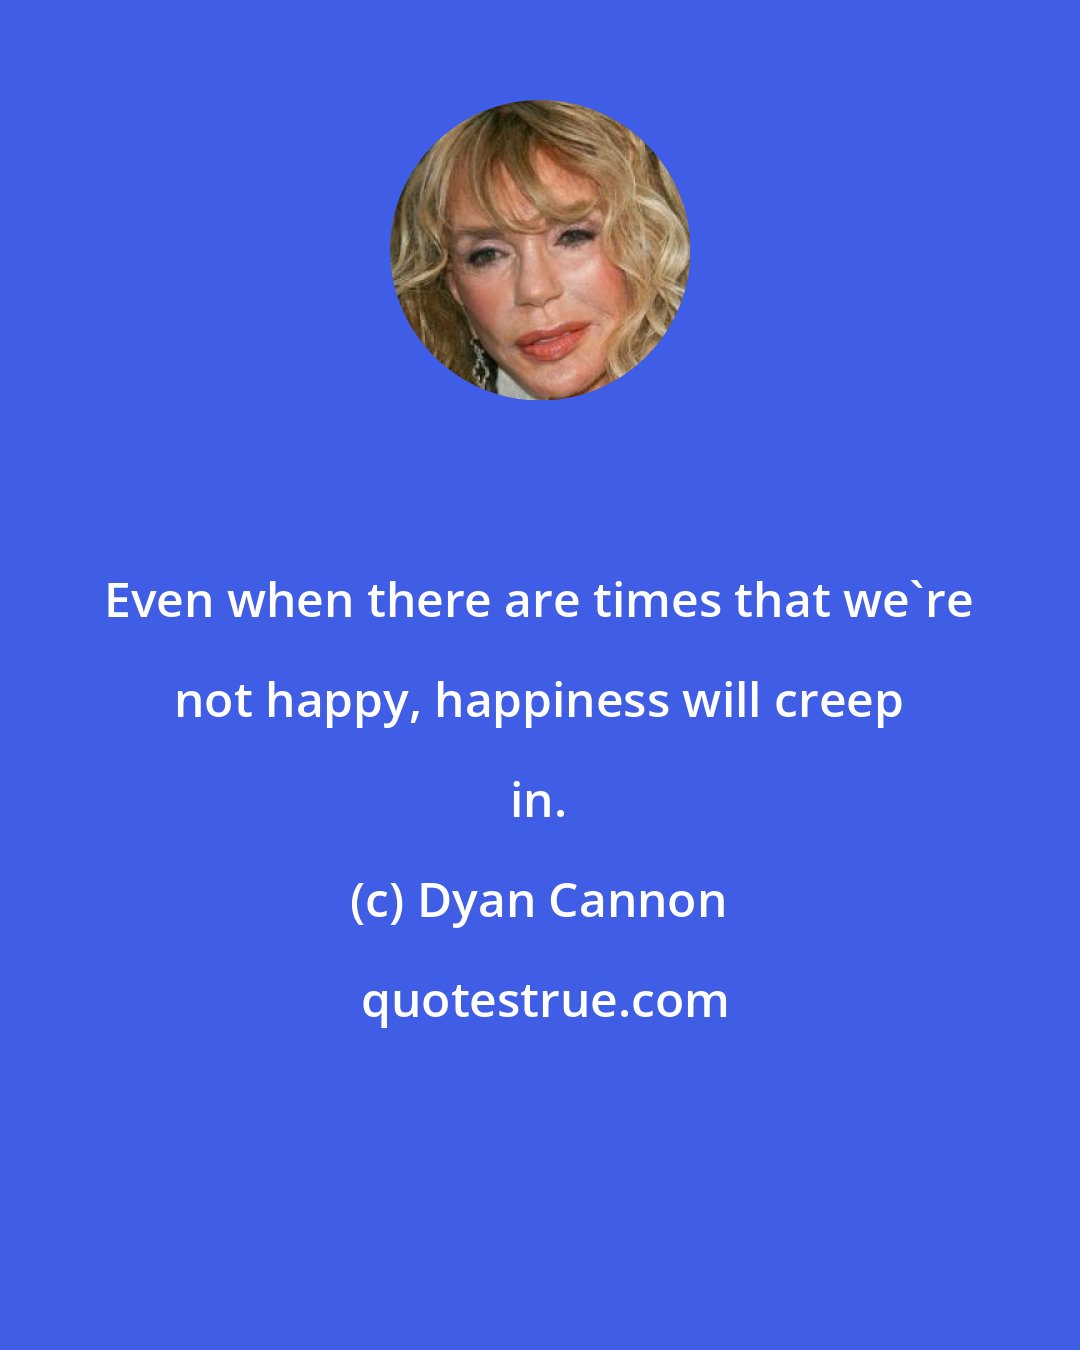 Dyan Cannon: Even when there are times that we're not happy, happiness will creep in.